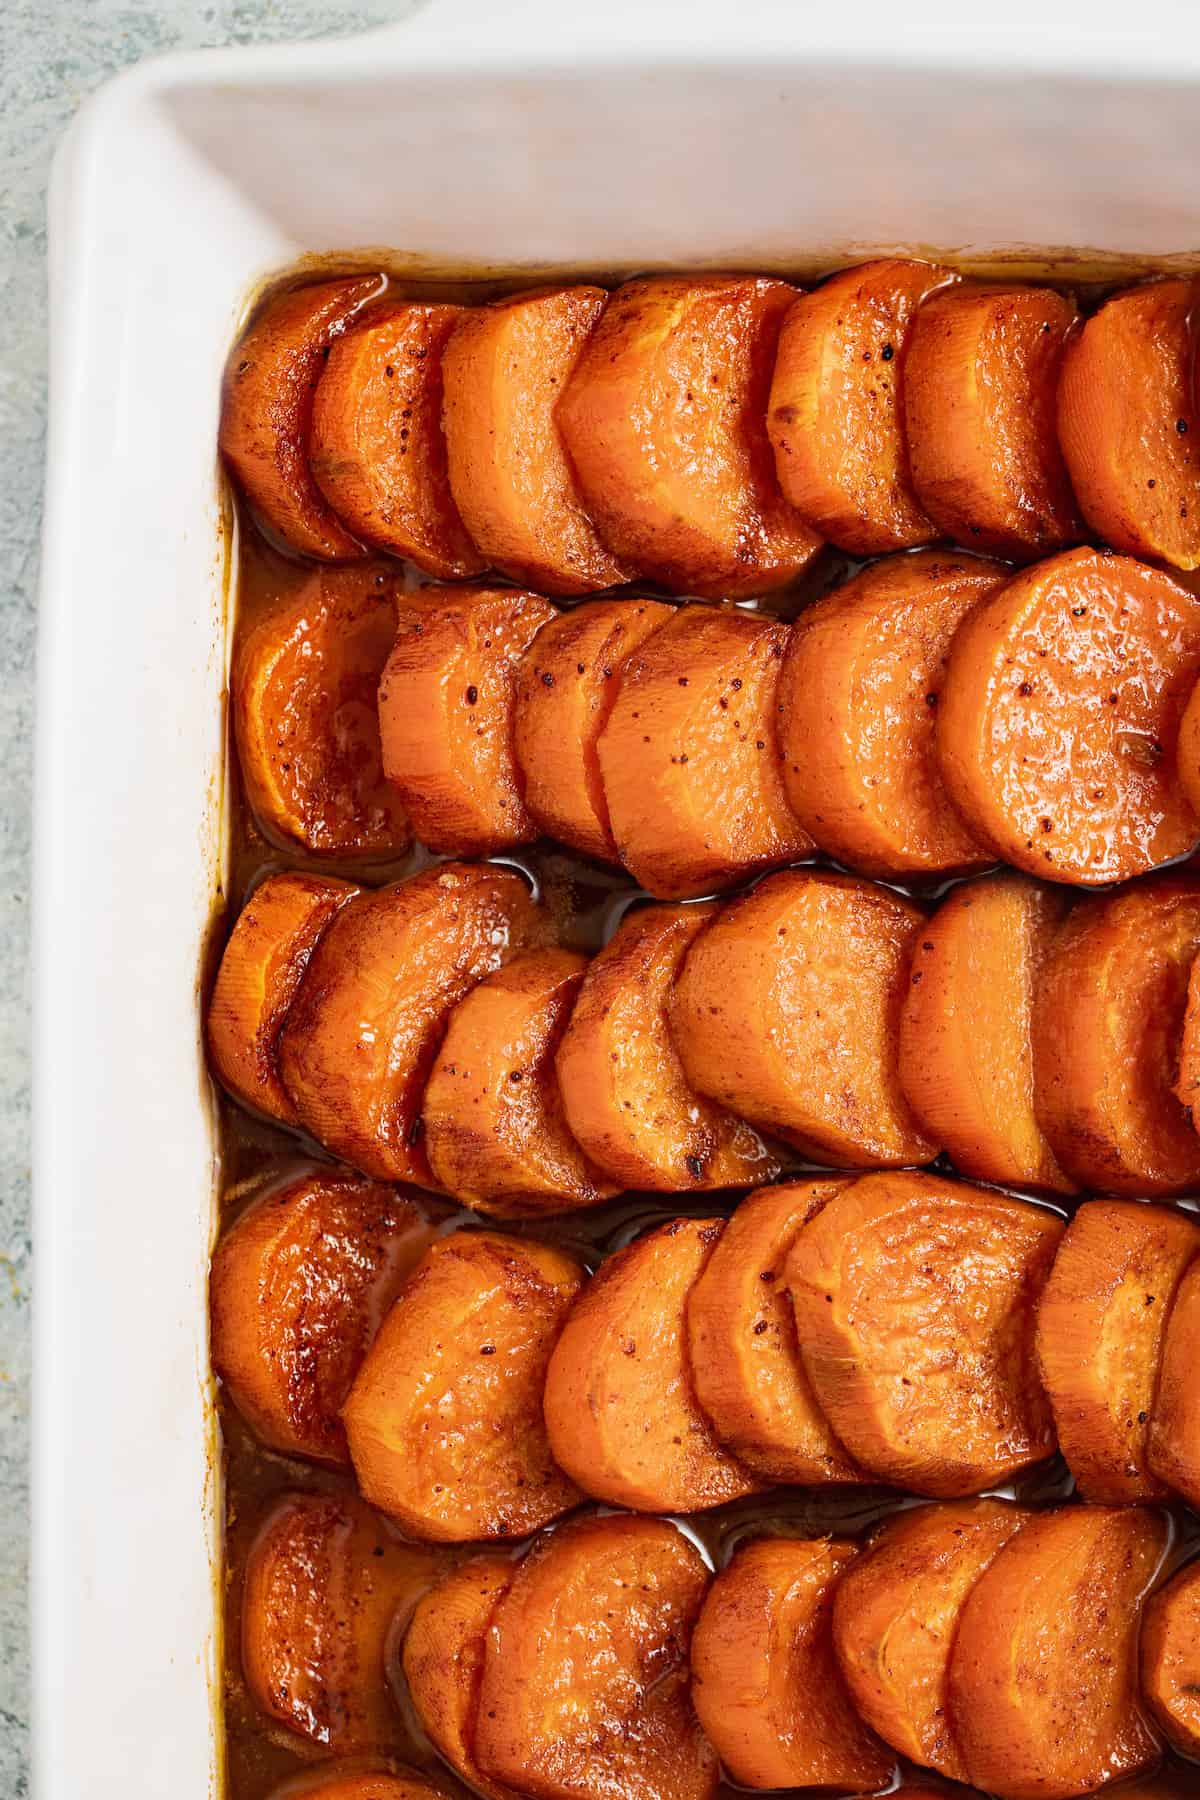 Baked candied yams without pecans in the baking dish.